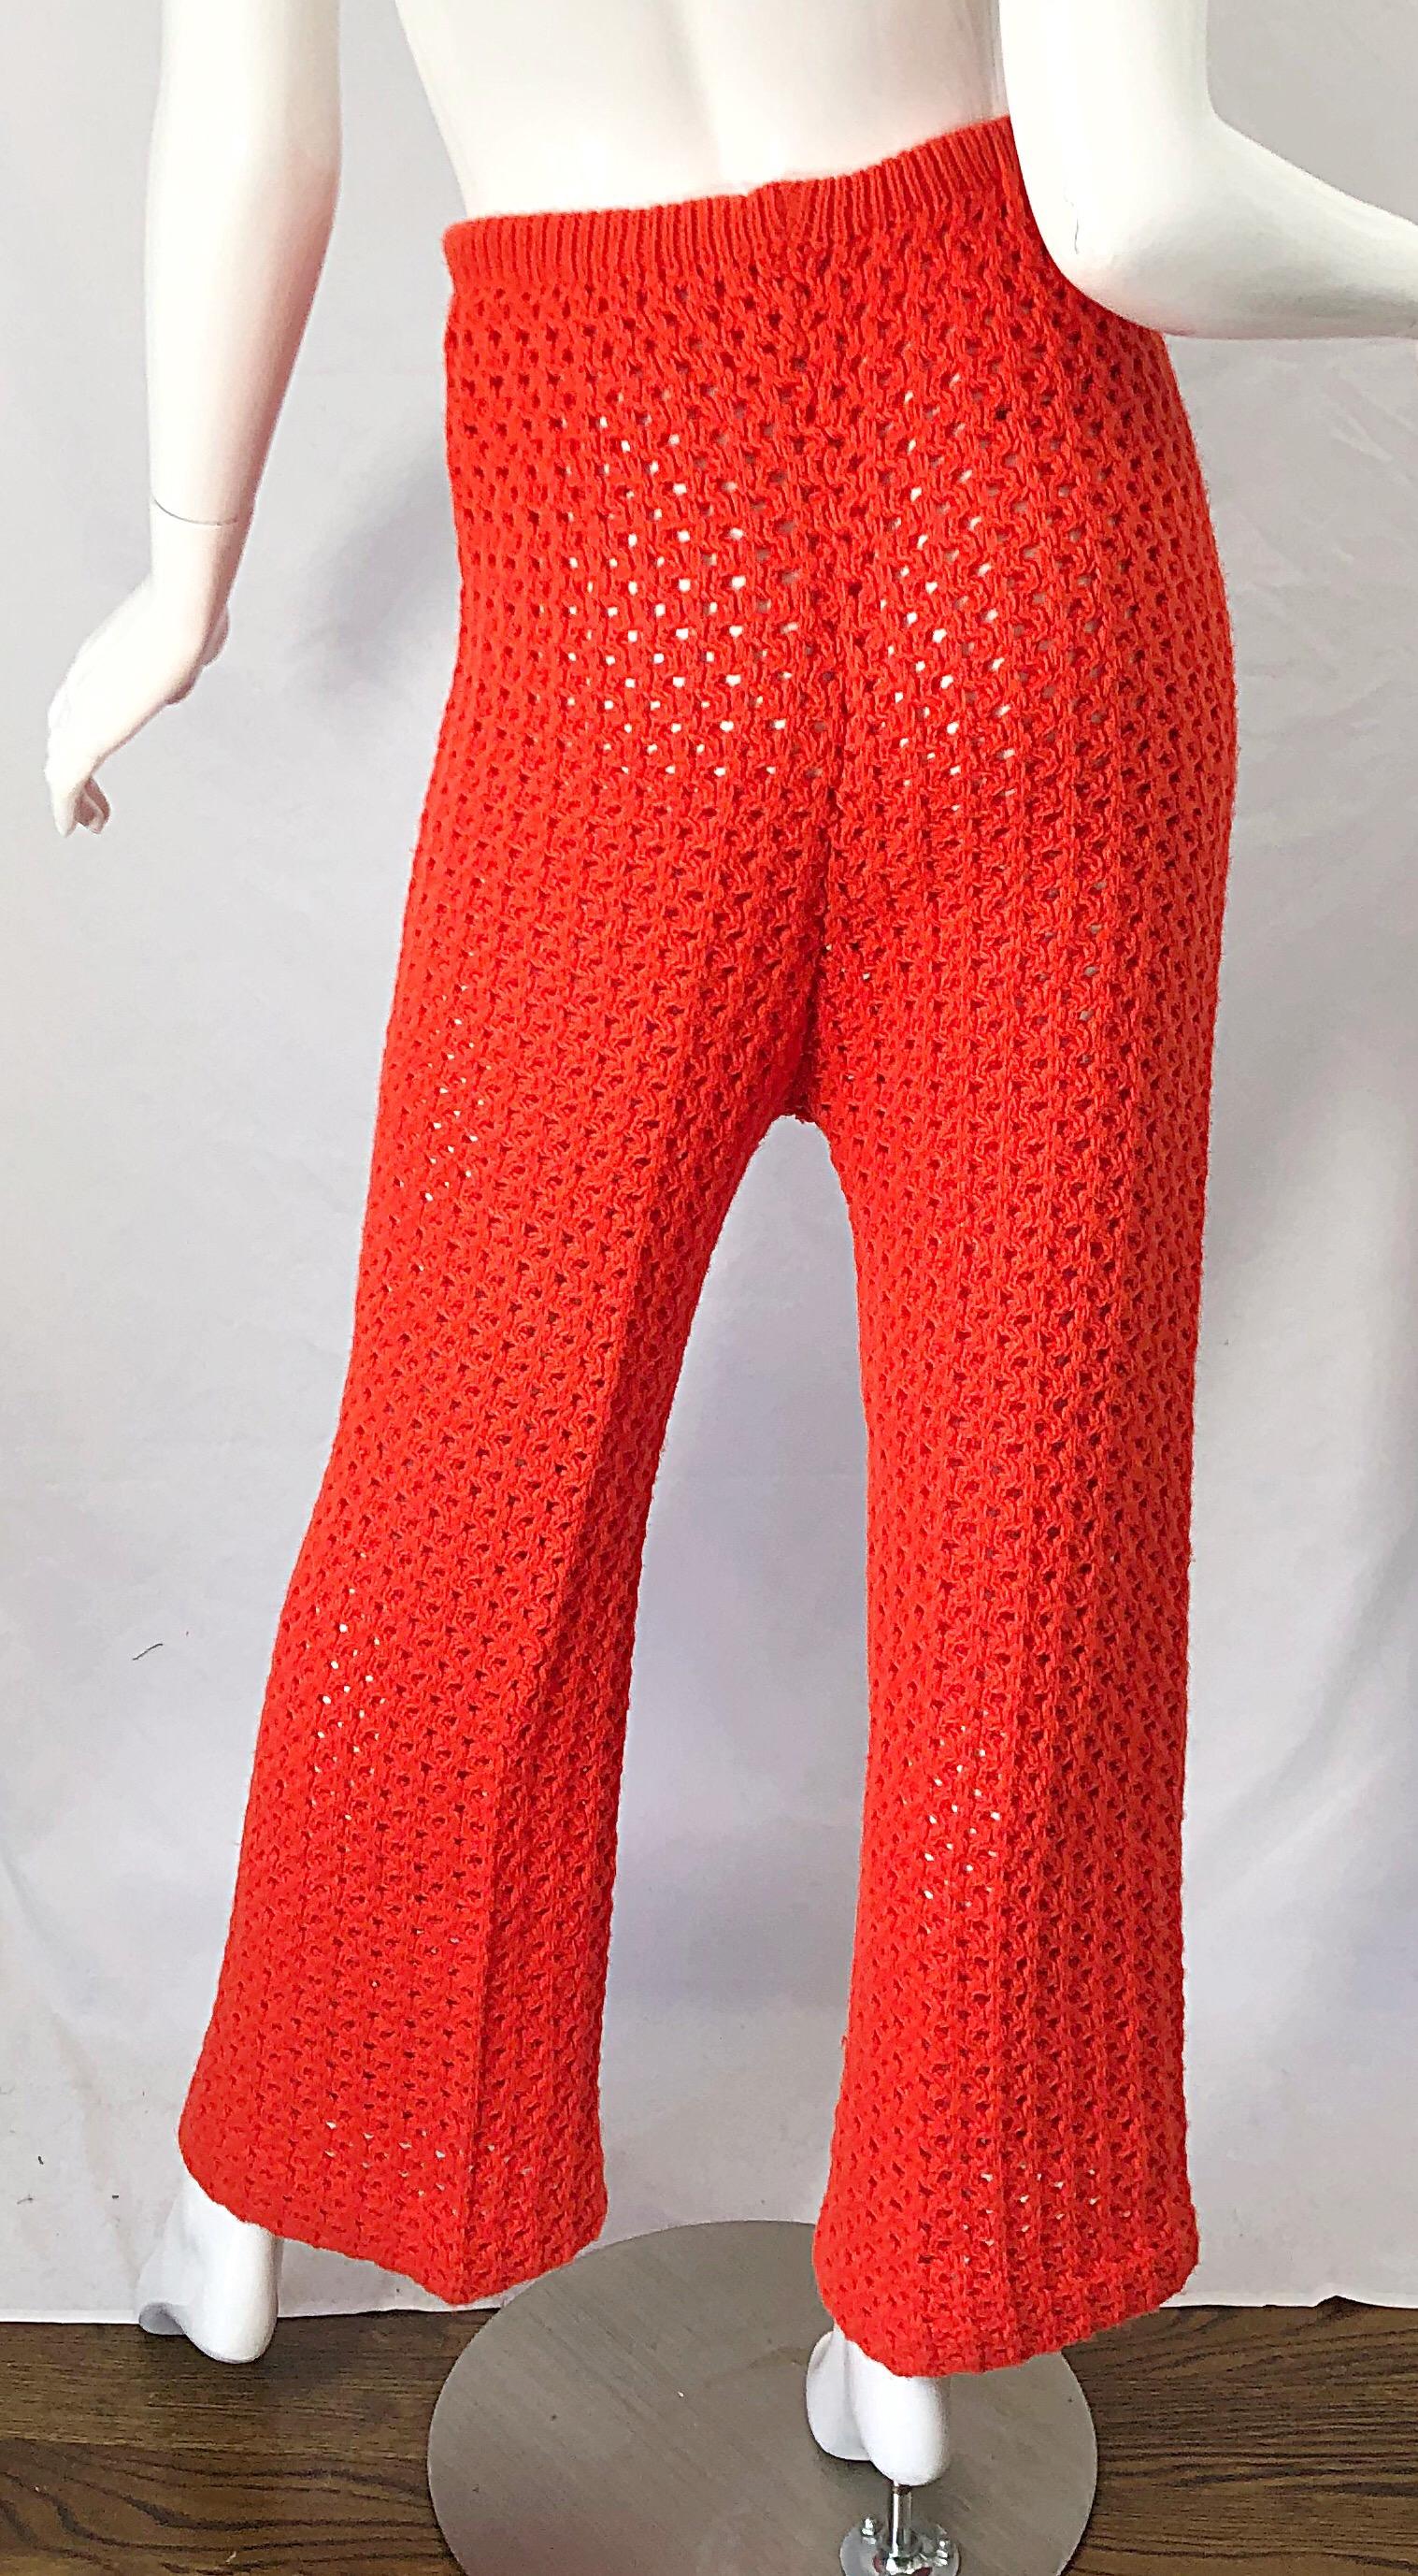 Awesome vintage 70s bright coral orange fully crochet high waisted flared leg trousers ! Crochet work was completely constructed by hand. Elastic waistband makes these pants easy to wear by many sizes. Can easily be dressed up or down. Great with a